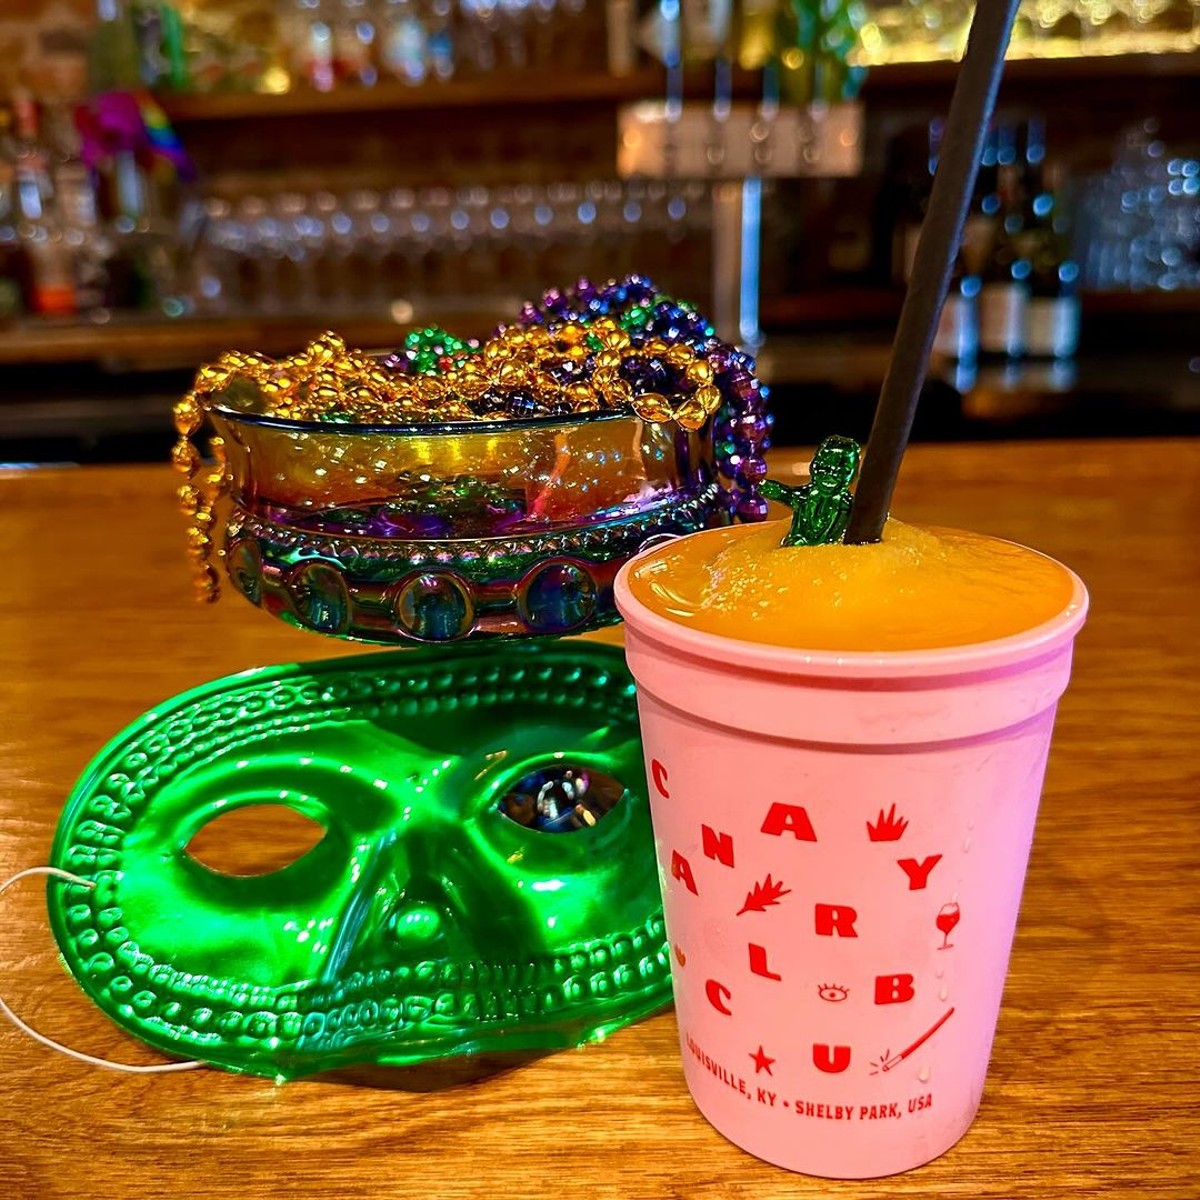 Louisville is stocked up on beads and hurricanes in honor of Fat Tuesday.